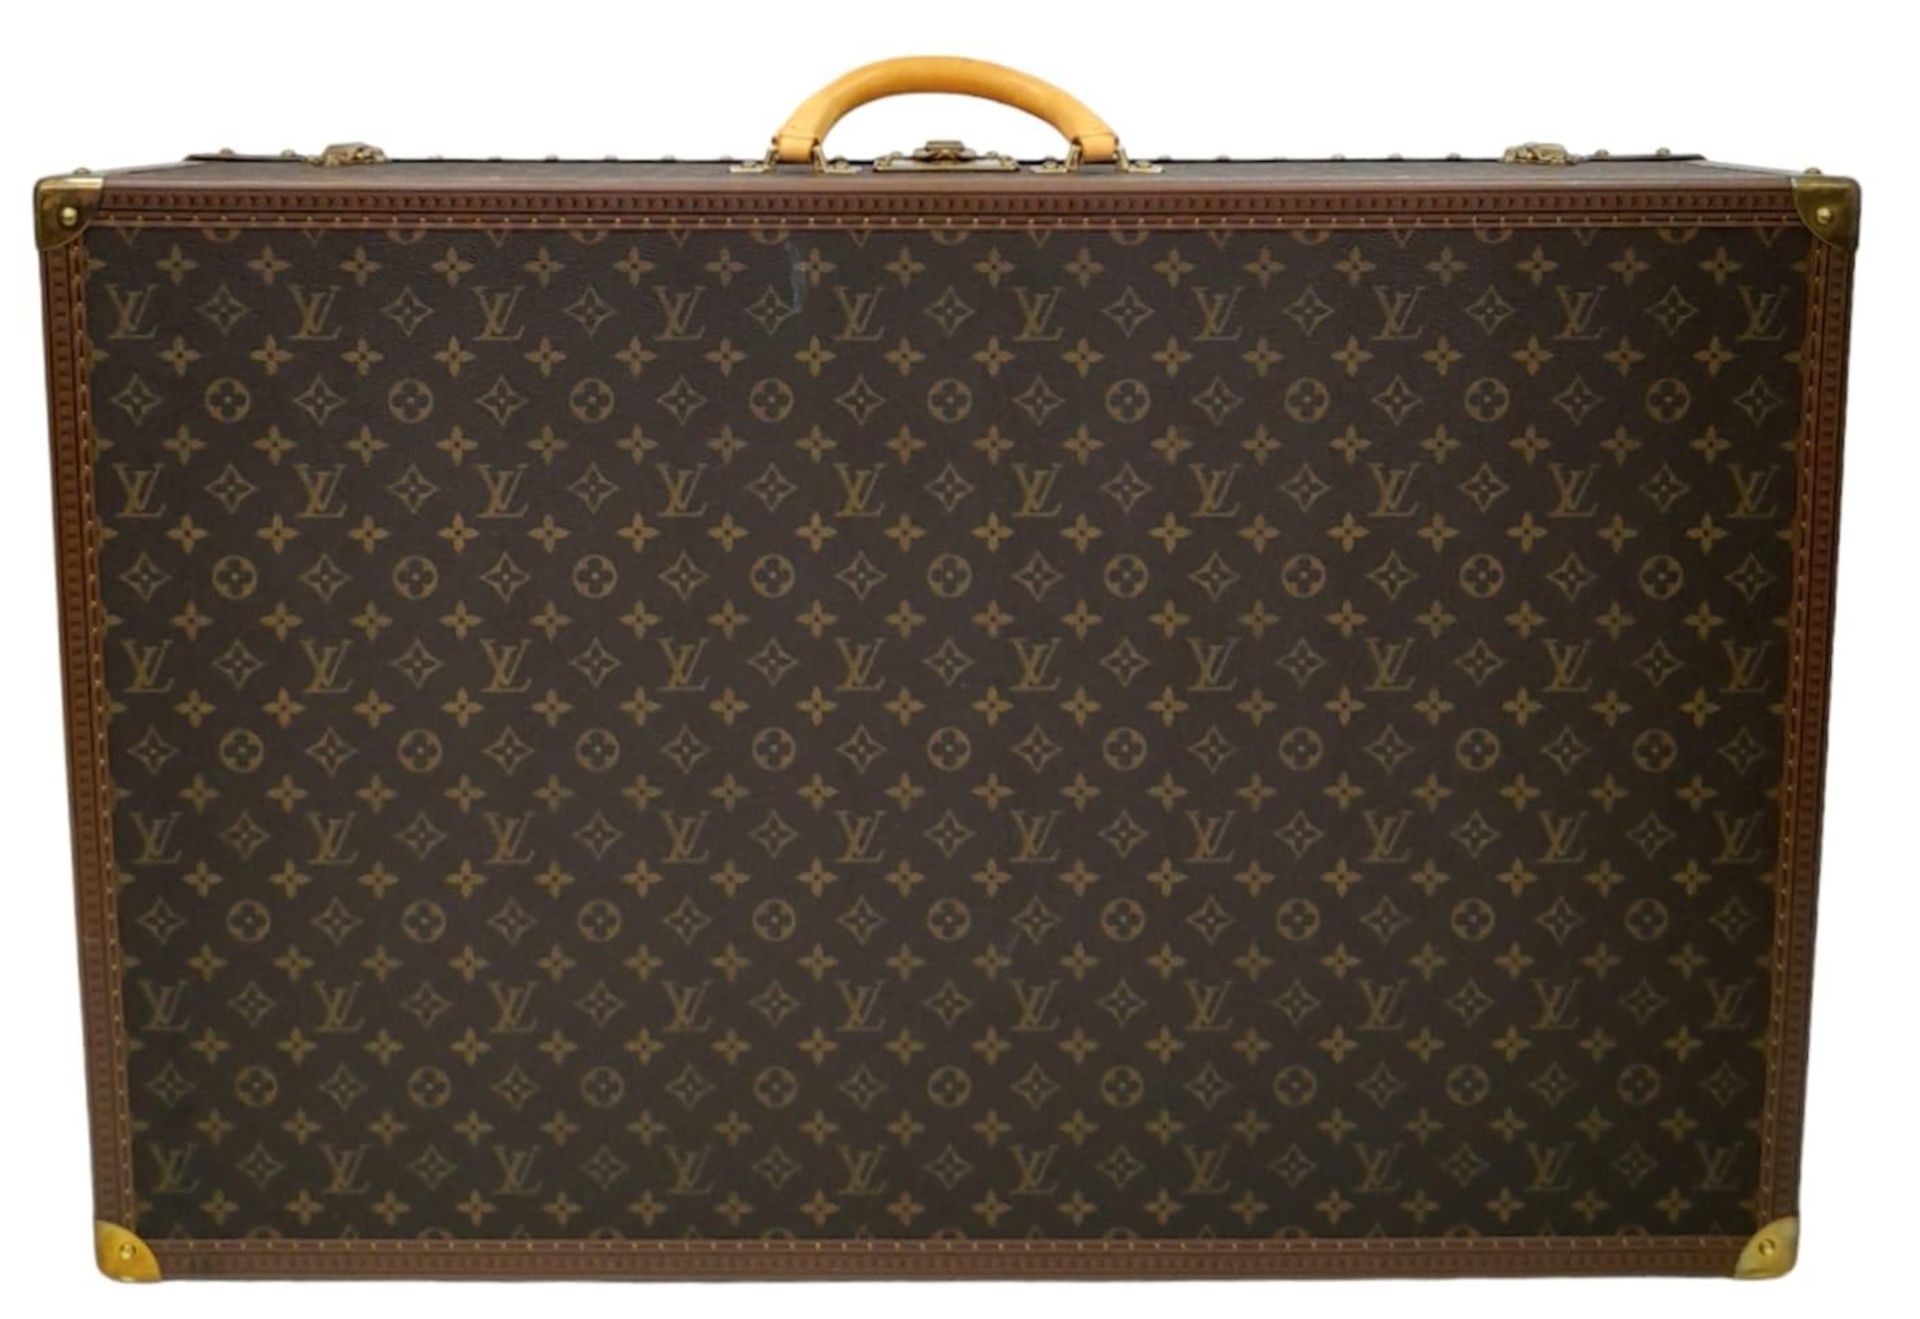 A Louis Vuitton Alzer 80 Monogram Large Sturdy Suitcase/Trunk. Monogram canvas and brown leather - Image 3 of 11